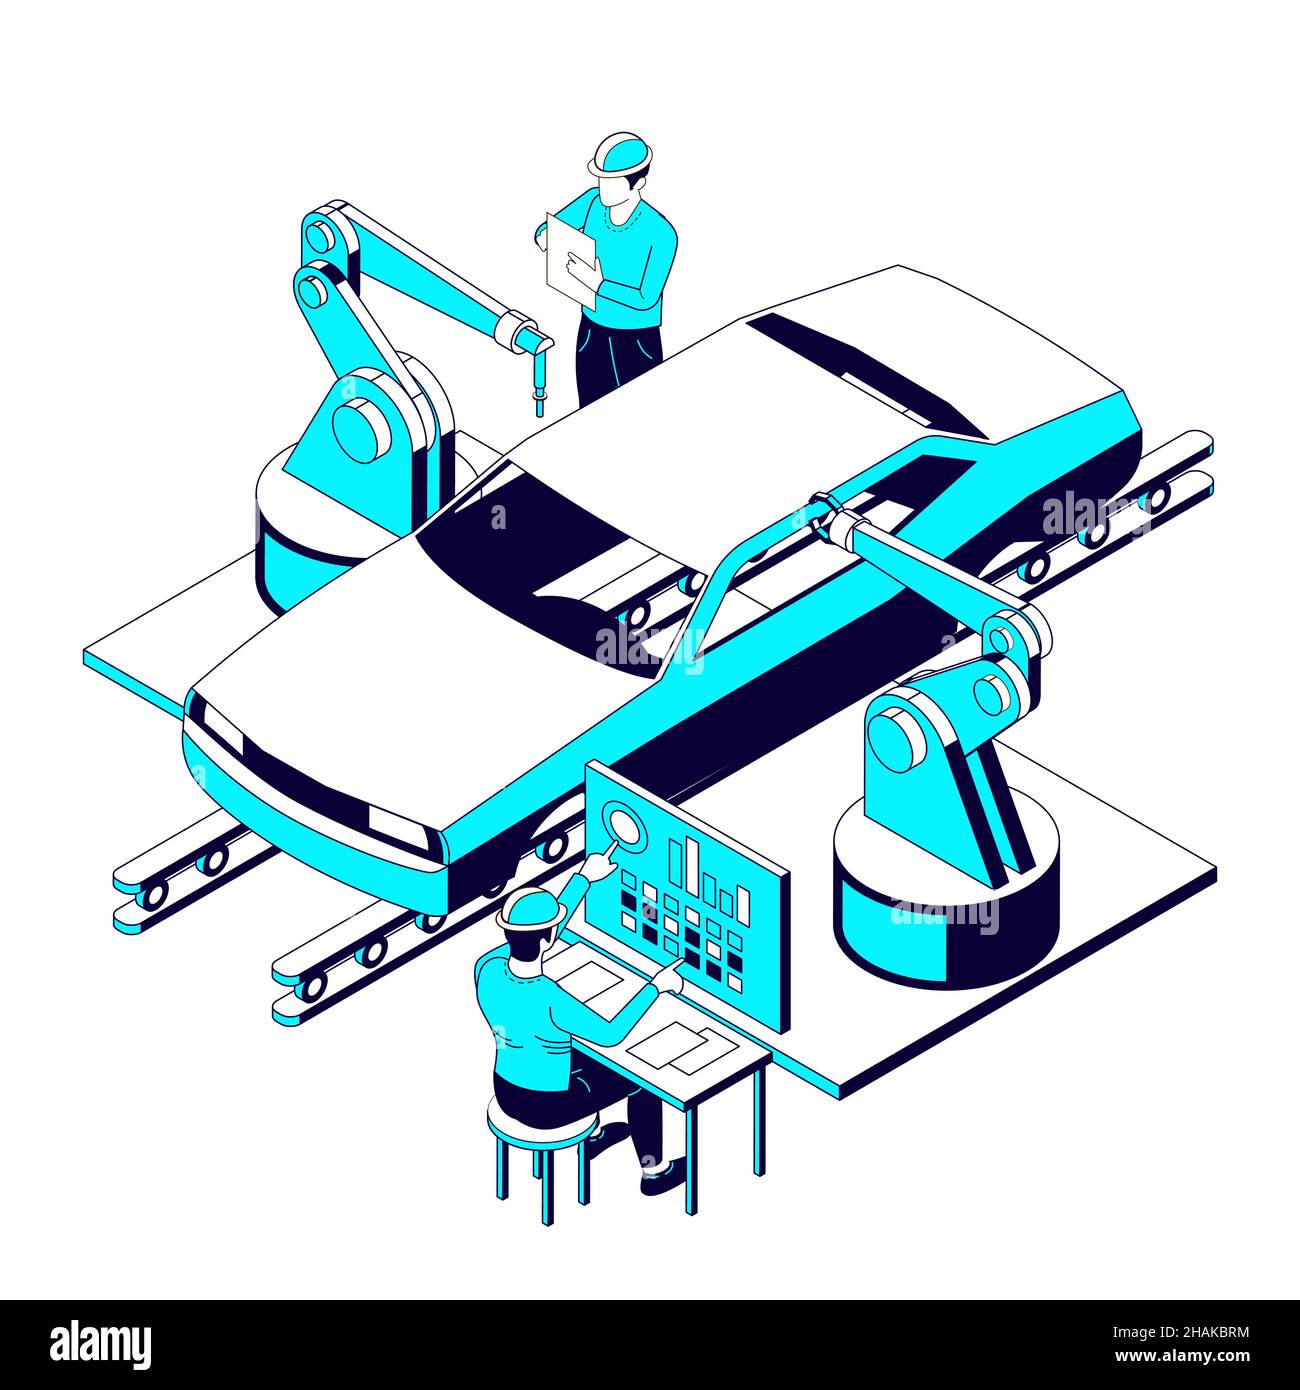 Car parts production isometric set with human character of worker operating arm manipulators assembling car body vector illustration Stock Vector